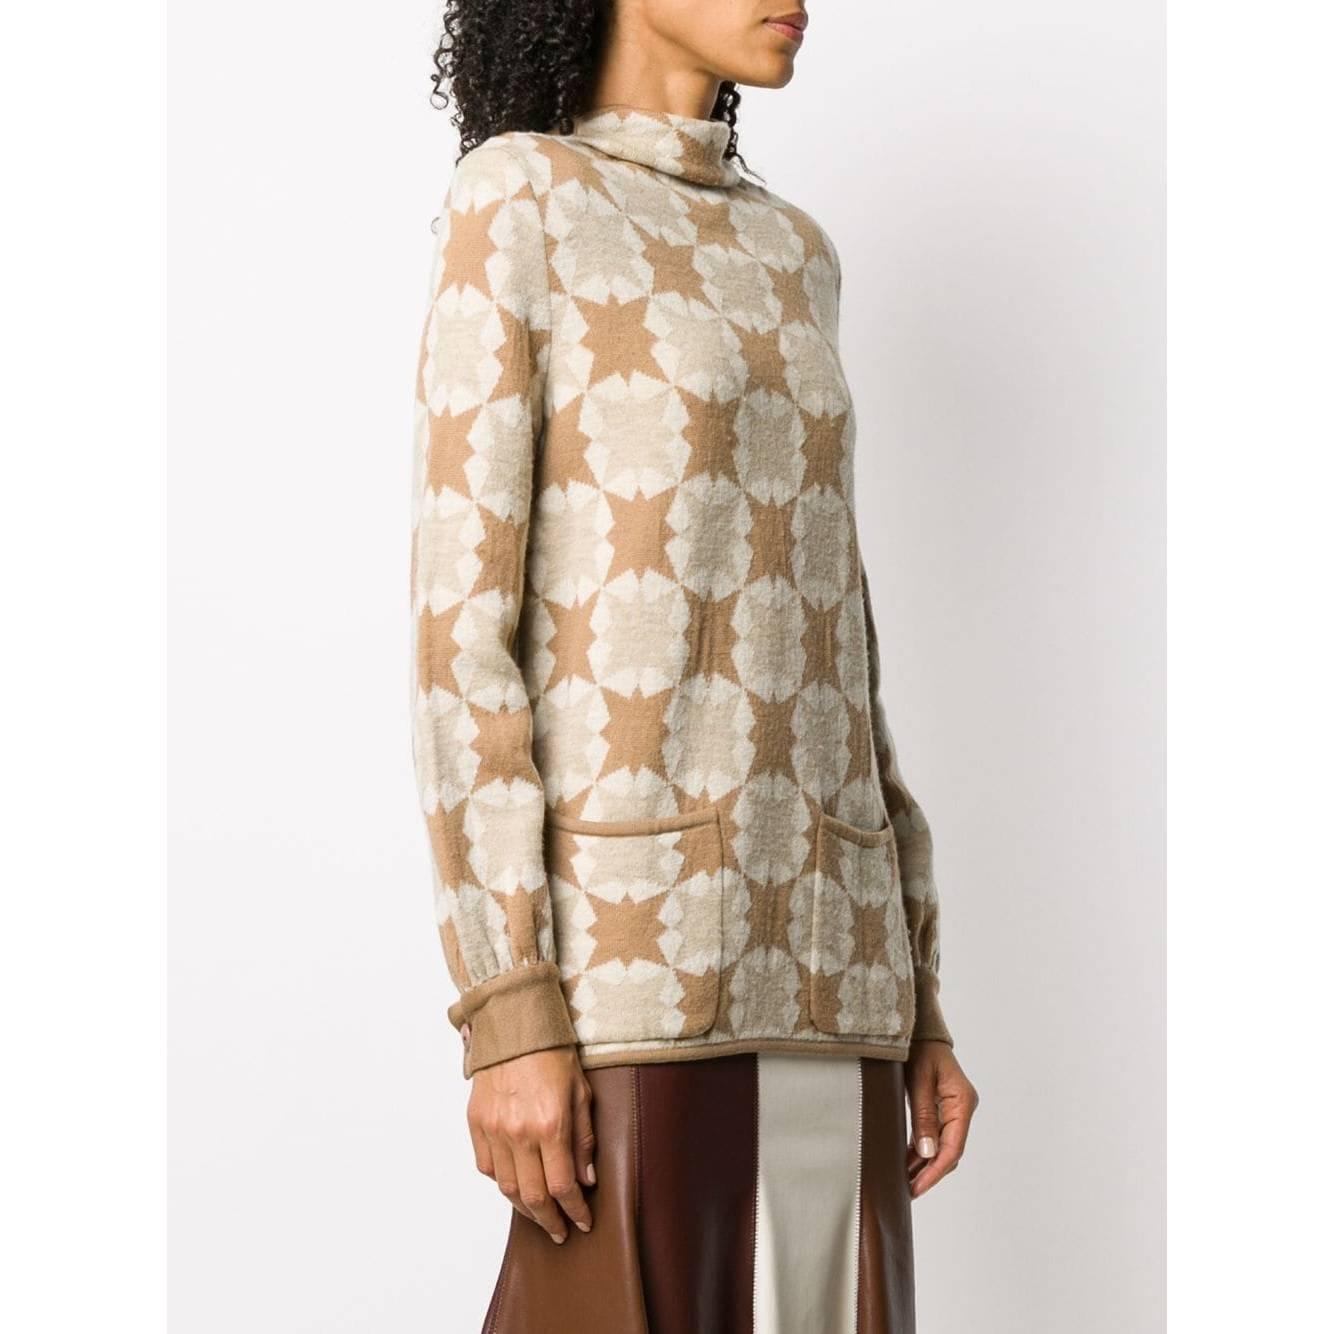 Valentino Boutique beige and brown geometric pattern wool sweater. Slightly stand-up collar, long sleeves, buttoned cuffs, two patch front pockets and straight hem. Slightly padded shoulders.

The item shows signs of wear on the fabric and buttons,